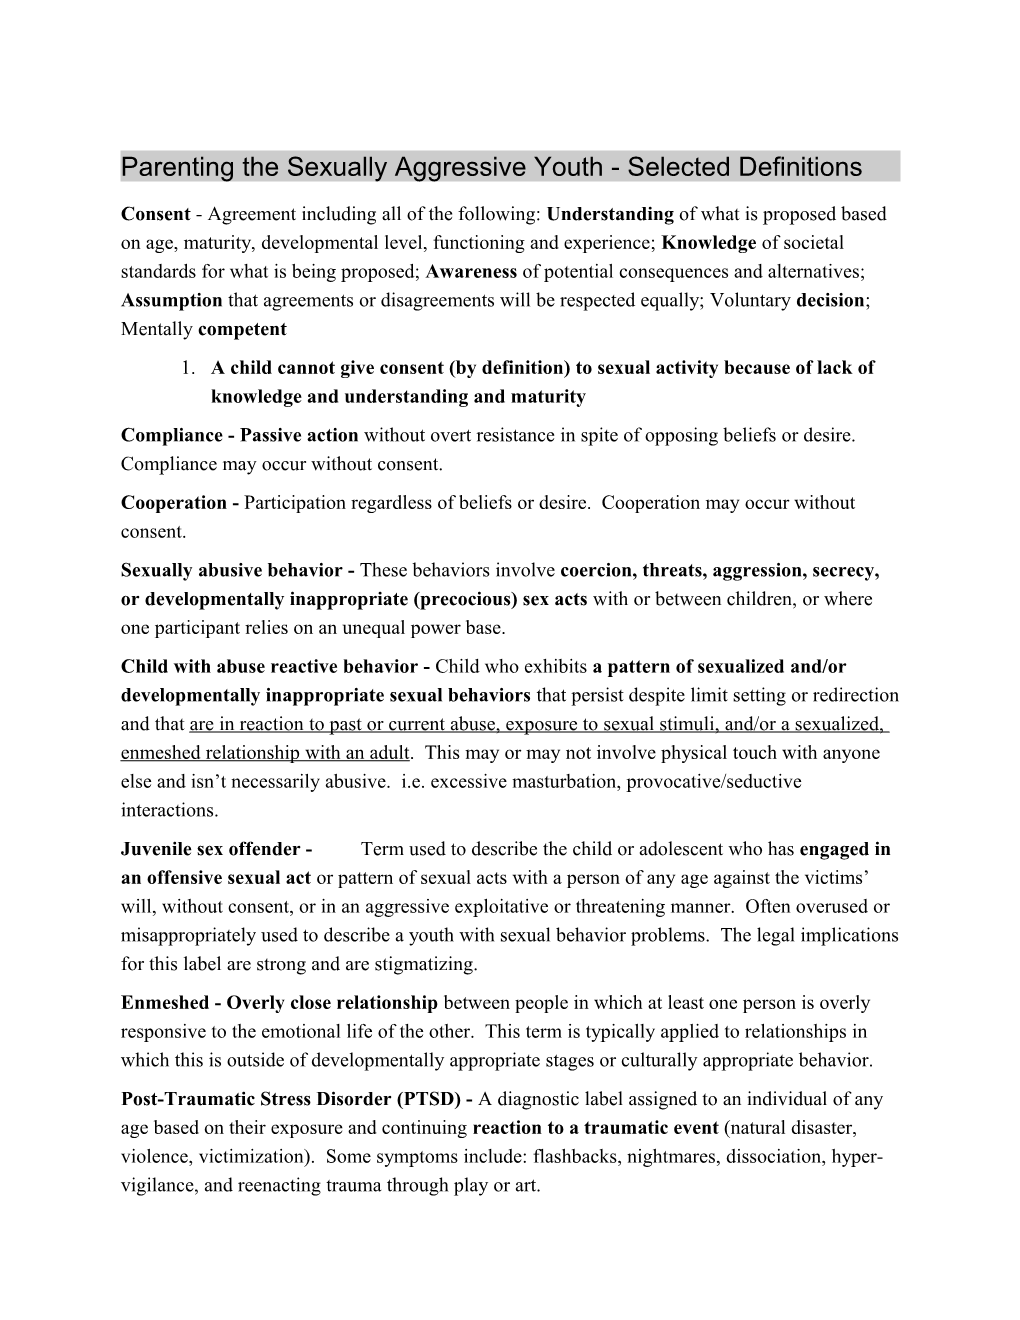 Parenting the Sexually Aggressive Youth - Selected Definitions